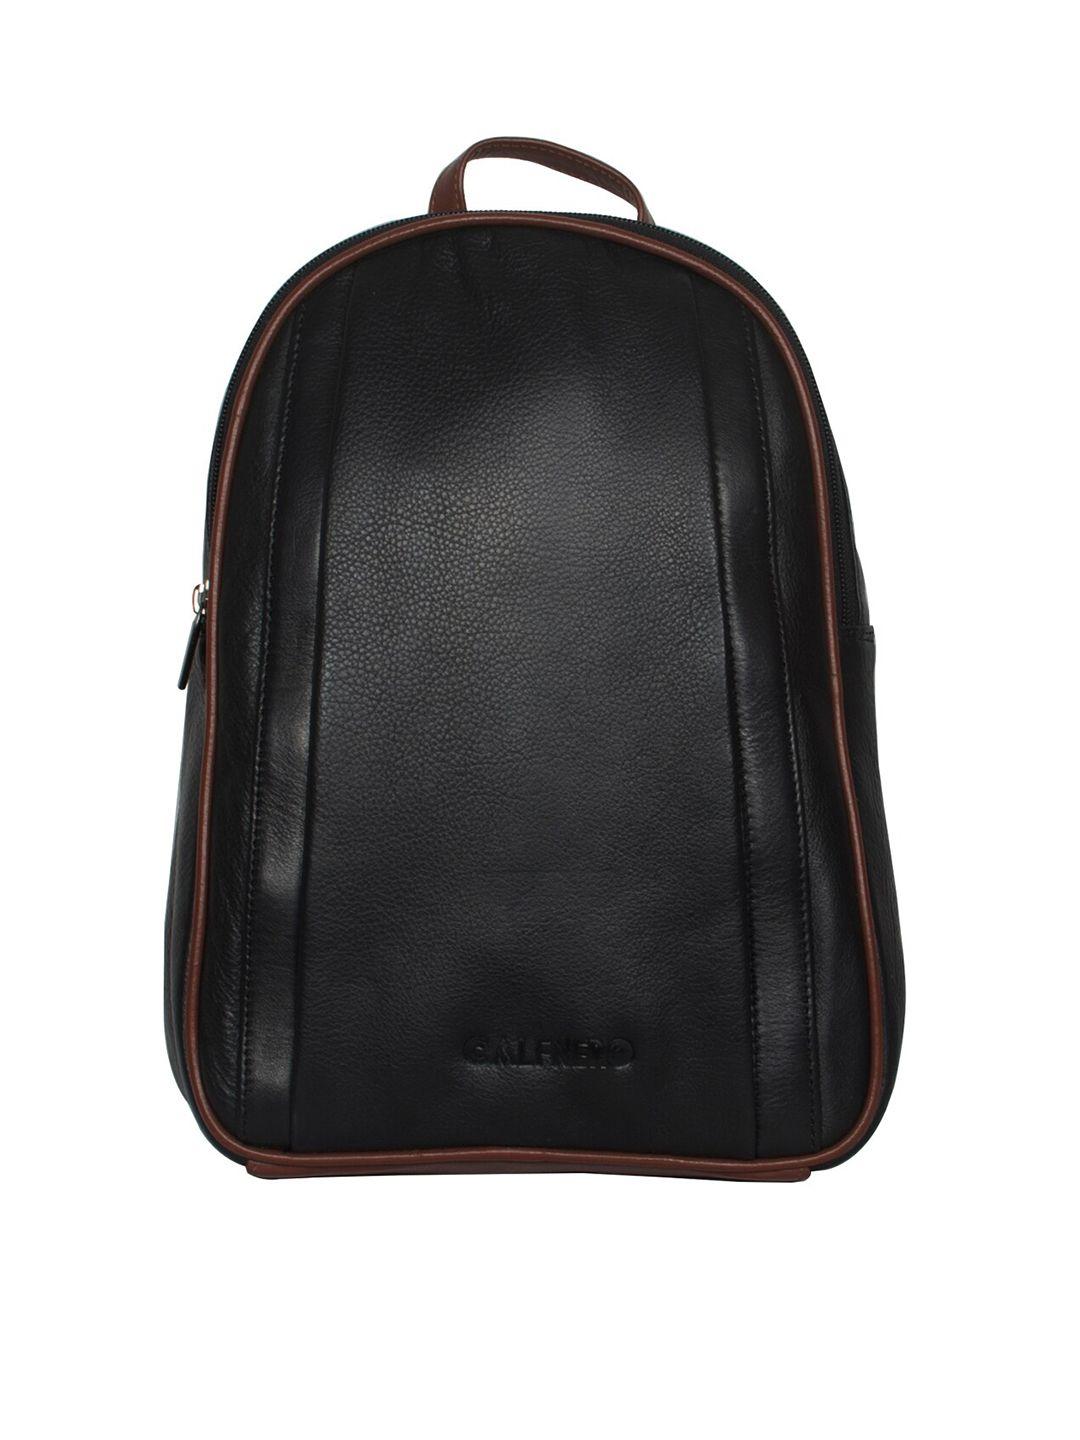 calfnero leather backpack